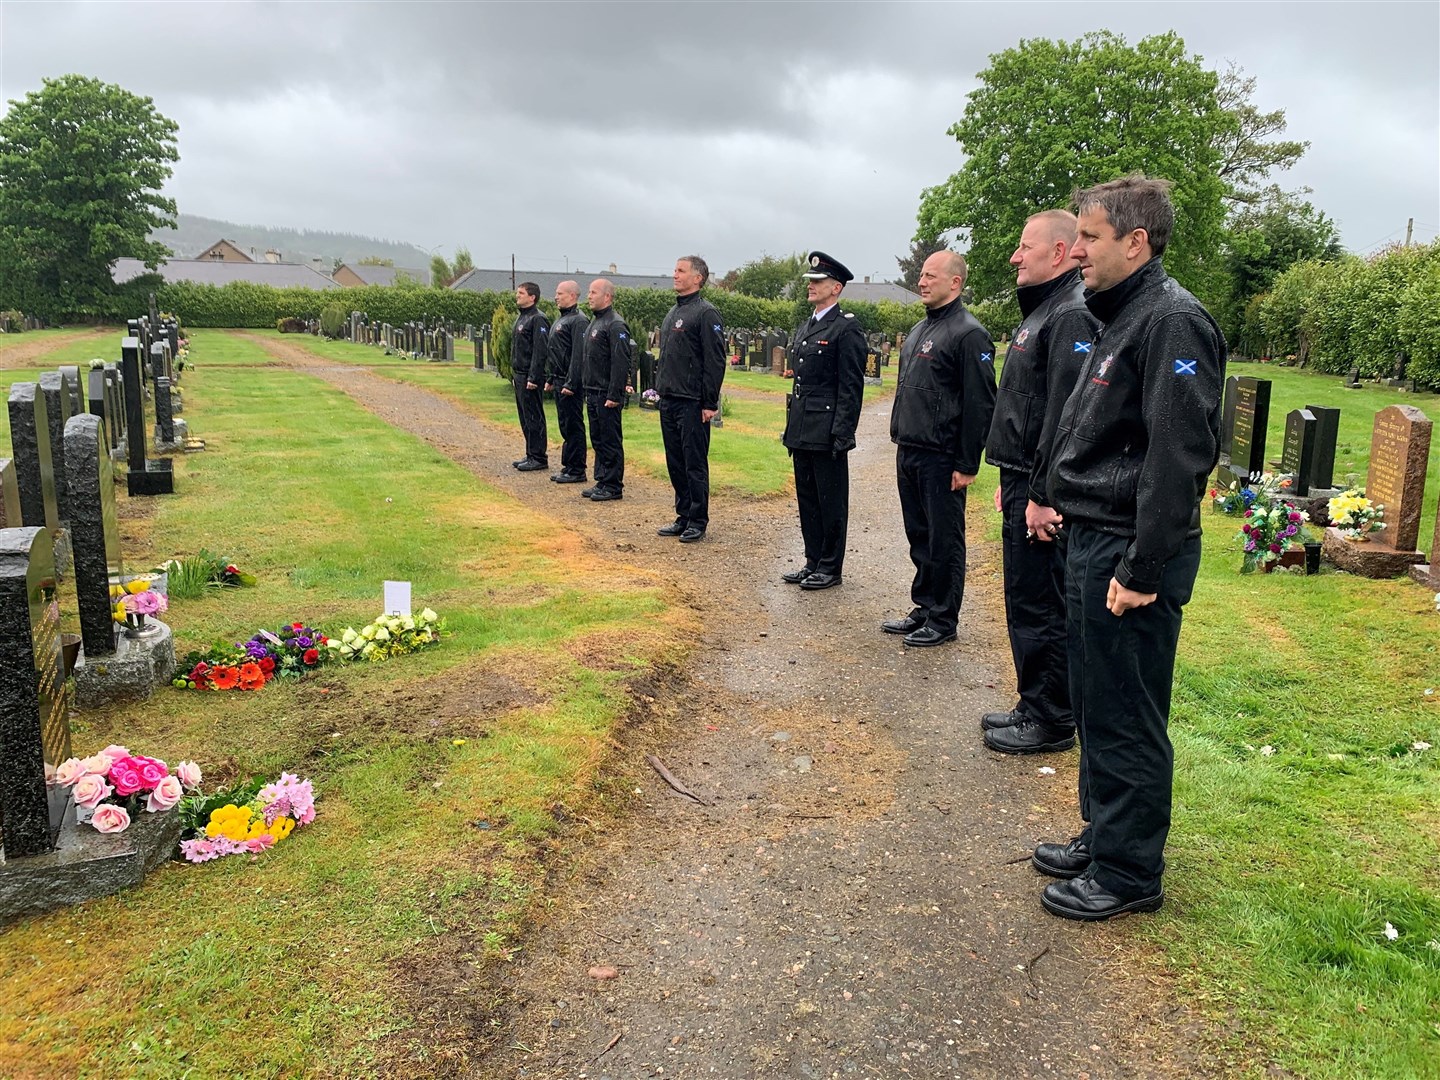 Fire service colleagues paid tribute to Roddy McLeod.